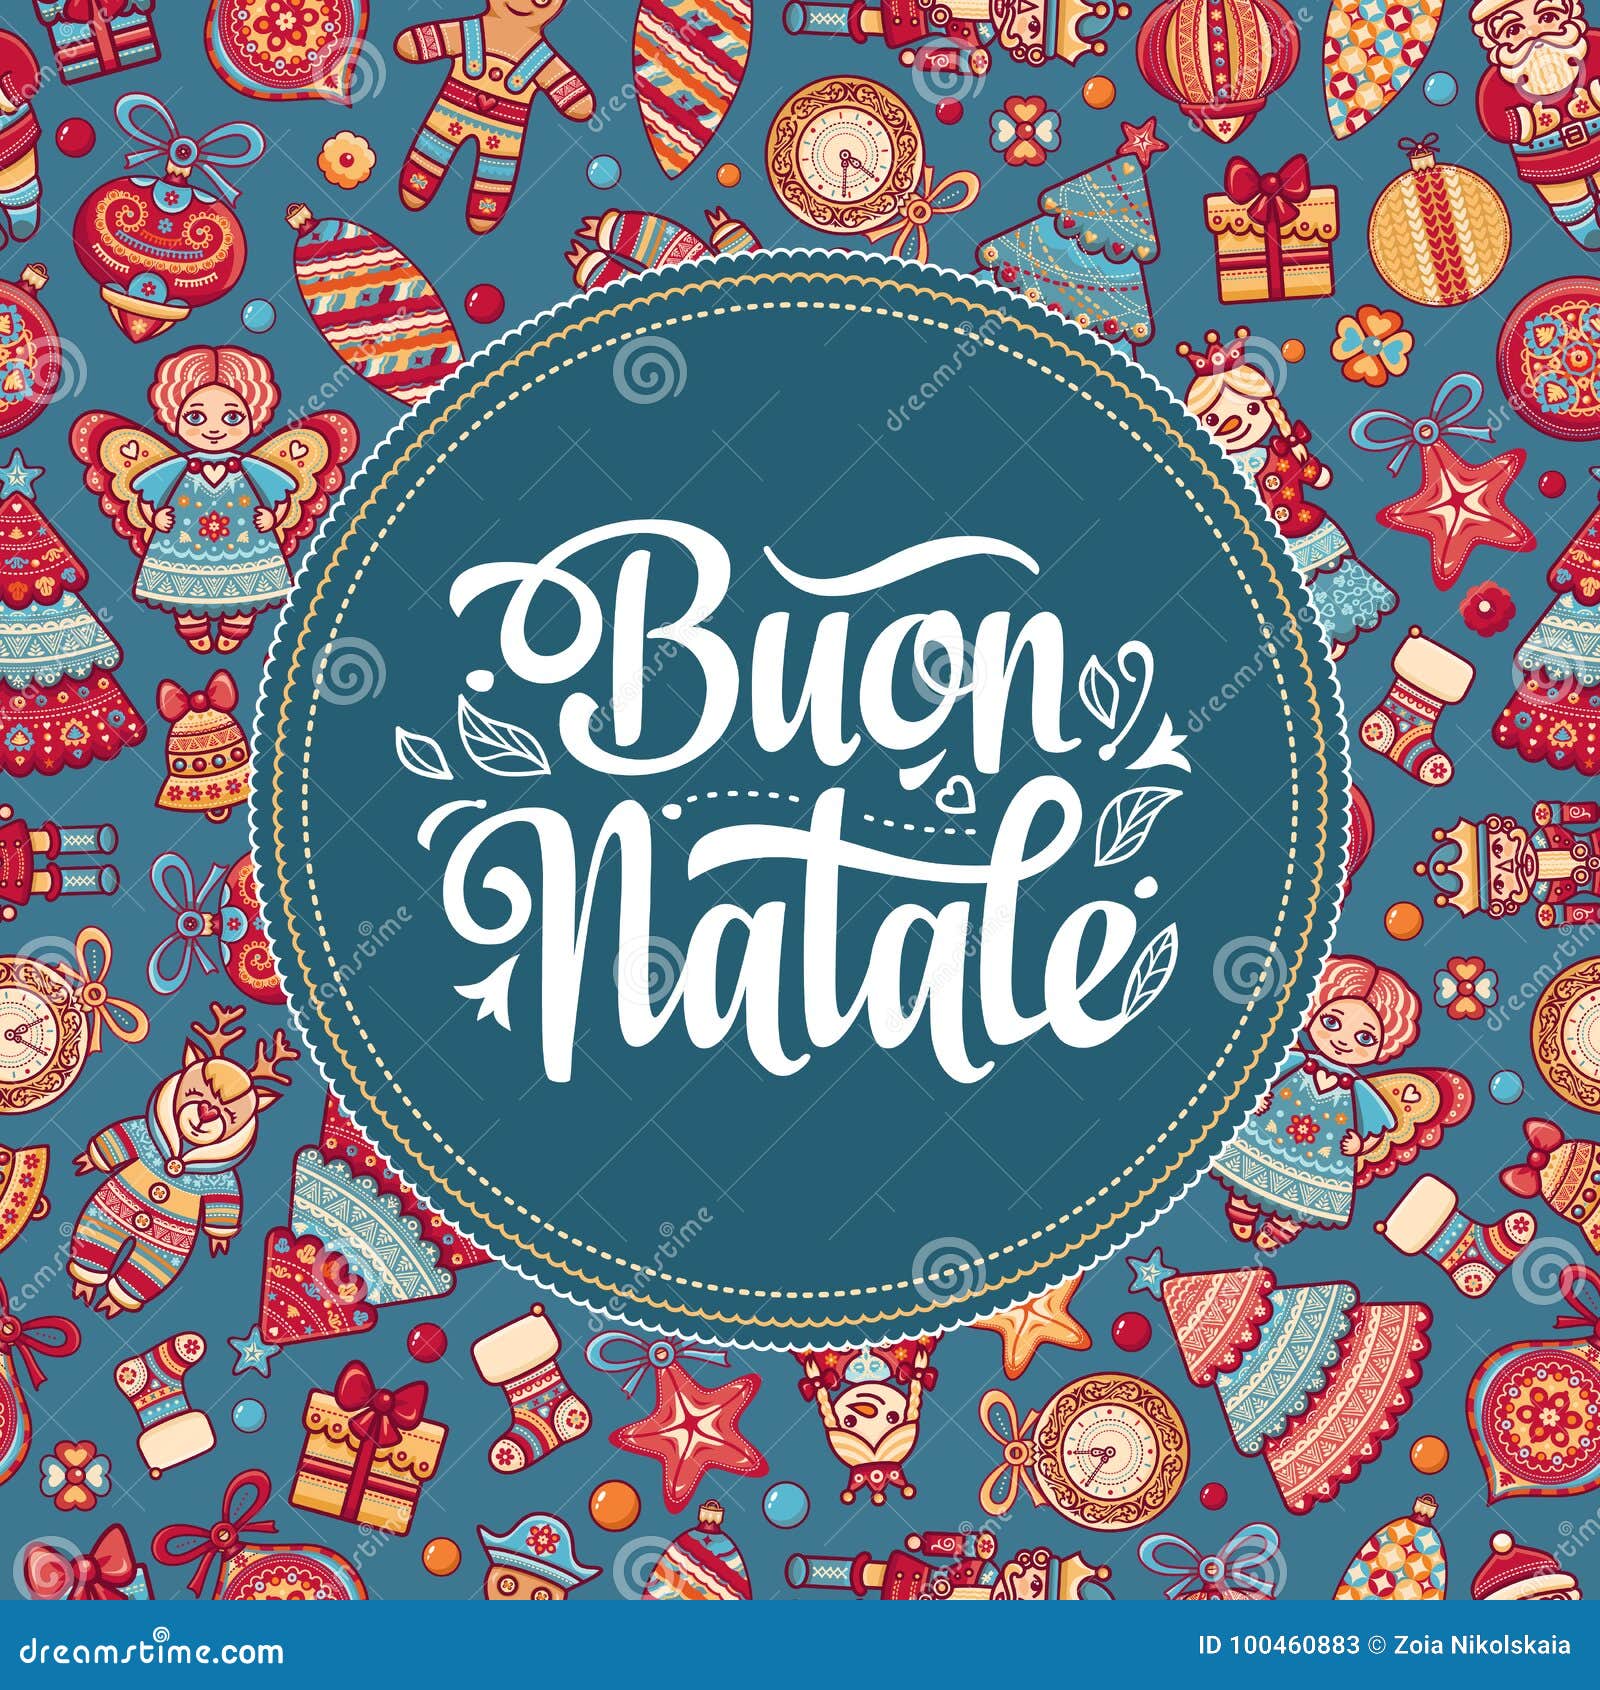 Buon Natale Vintage.Buon Natale Greeting Card Christmas Template Winter Holiday In Italy Congratulation On Italian Vintage Style Stock Illustration Illustration Of Holiday Natale 100460883